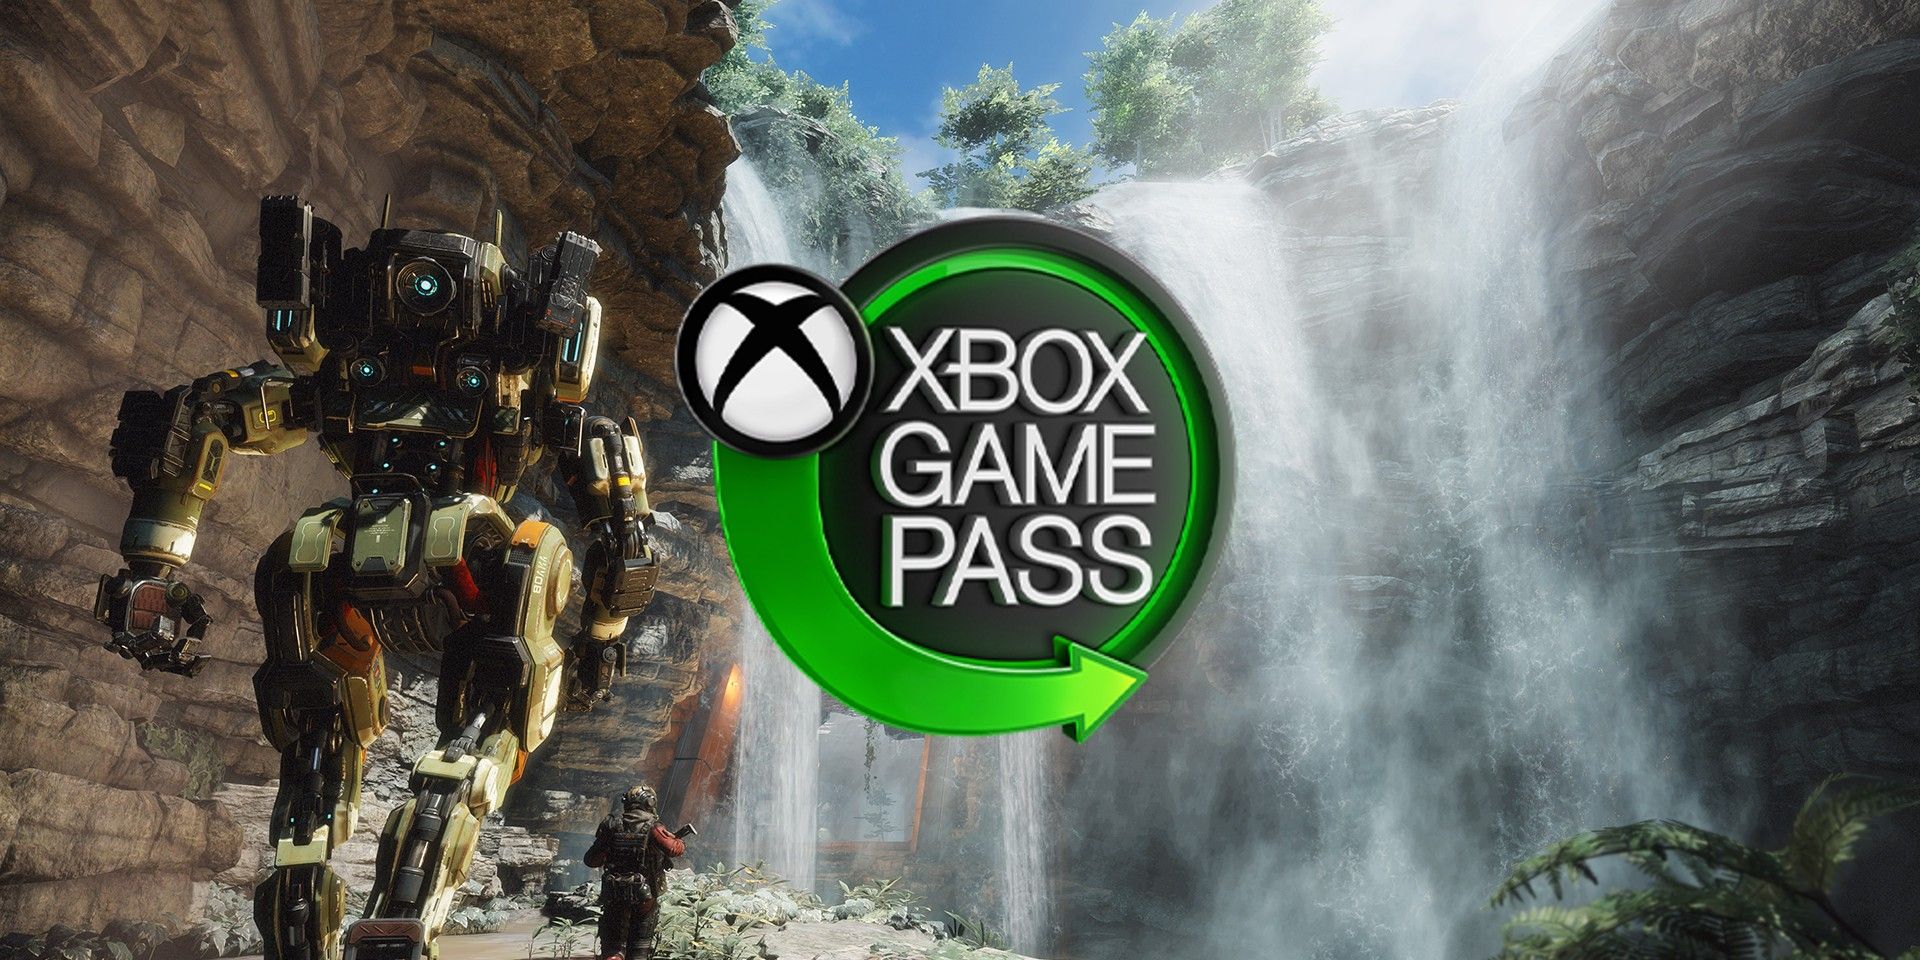 Xbox Game Pass Now Has EA Play Baked In